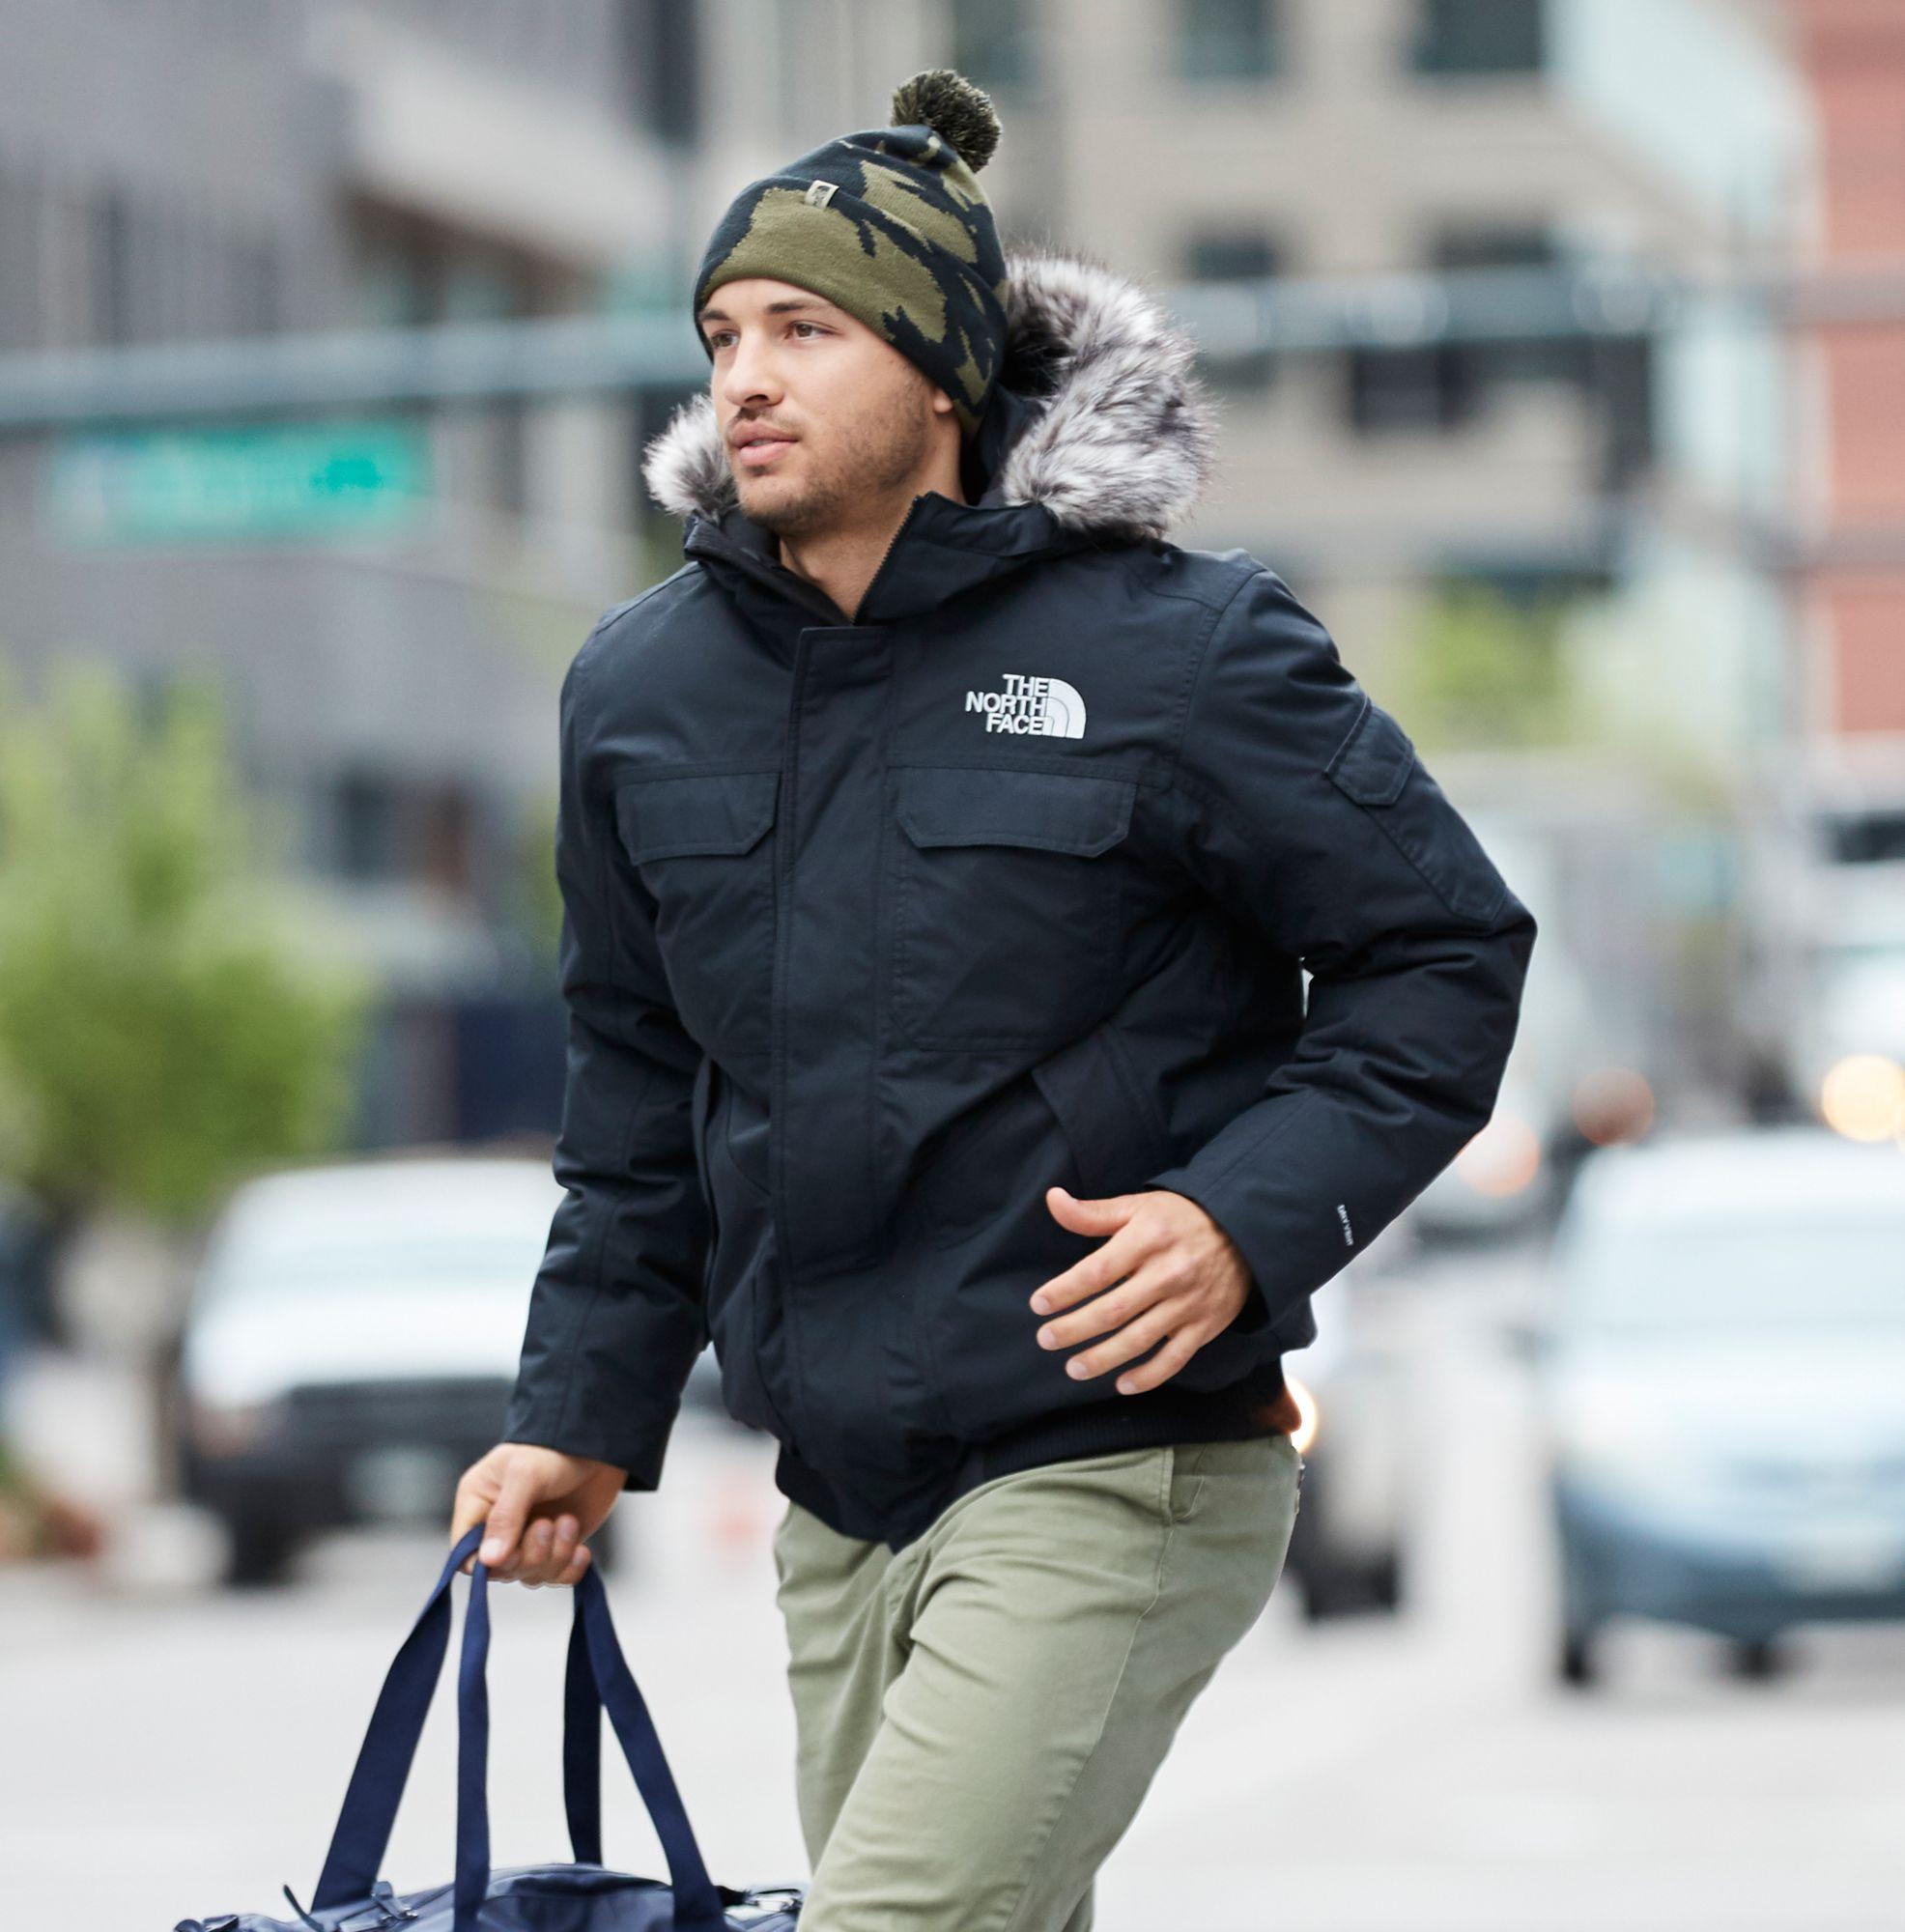 the north face men's gotham iii down jacket